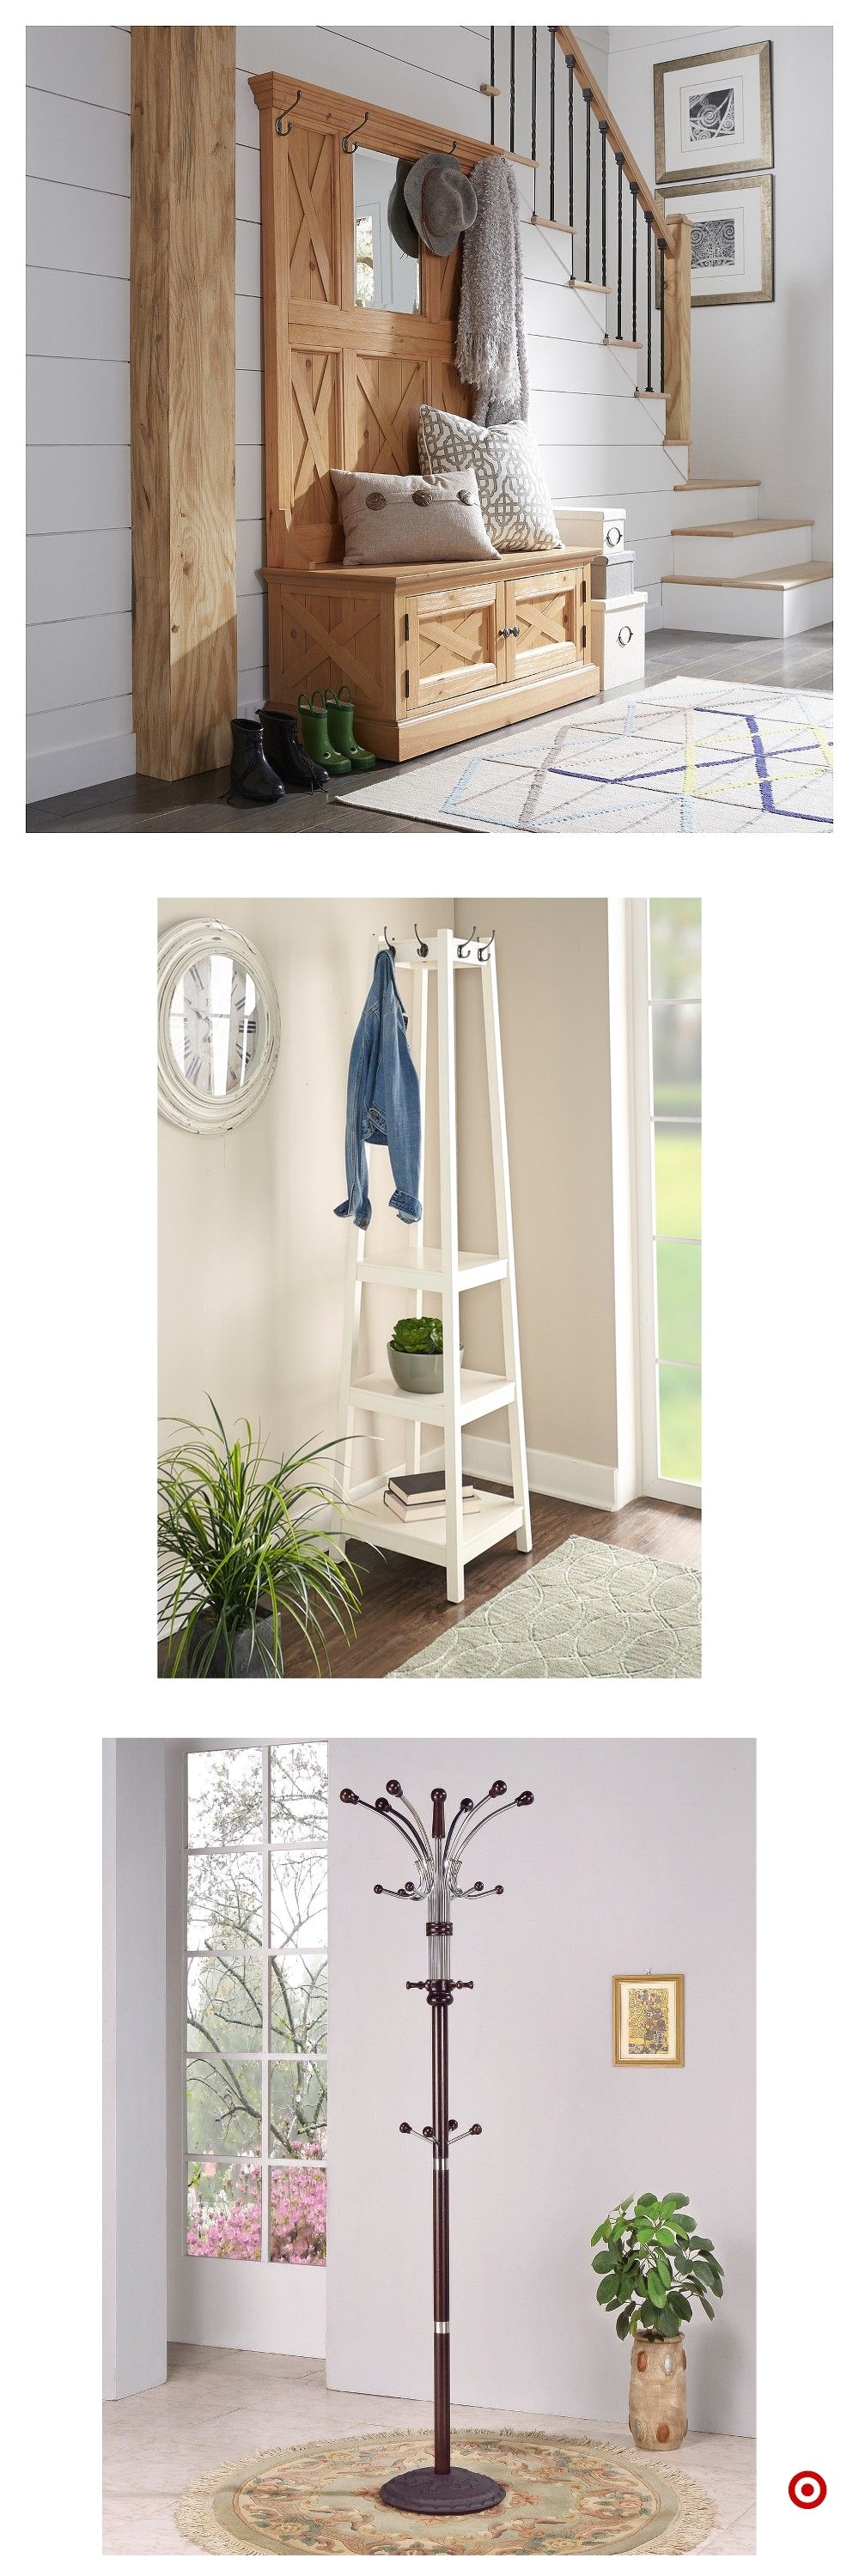 Target Hat Rack Shop Target for Freestanding Coat Rack You Will Love at Great Low